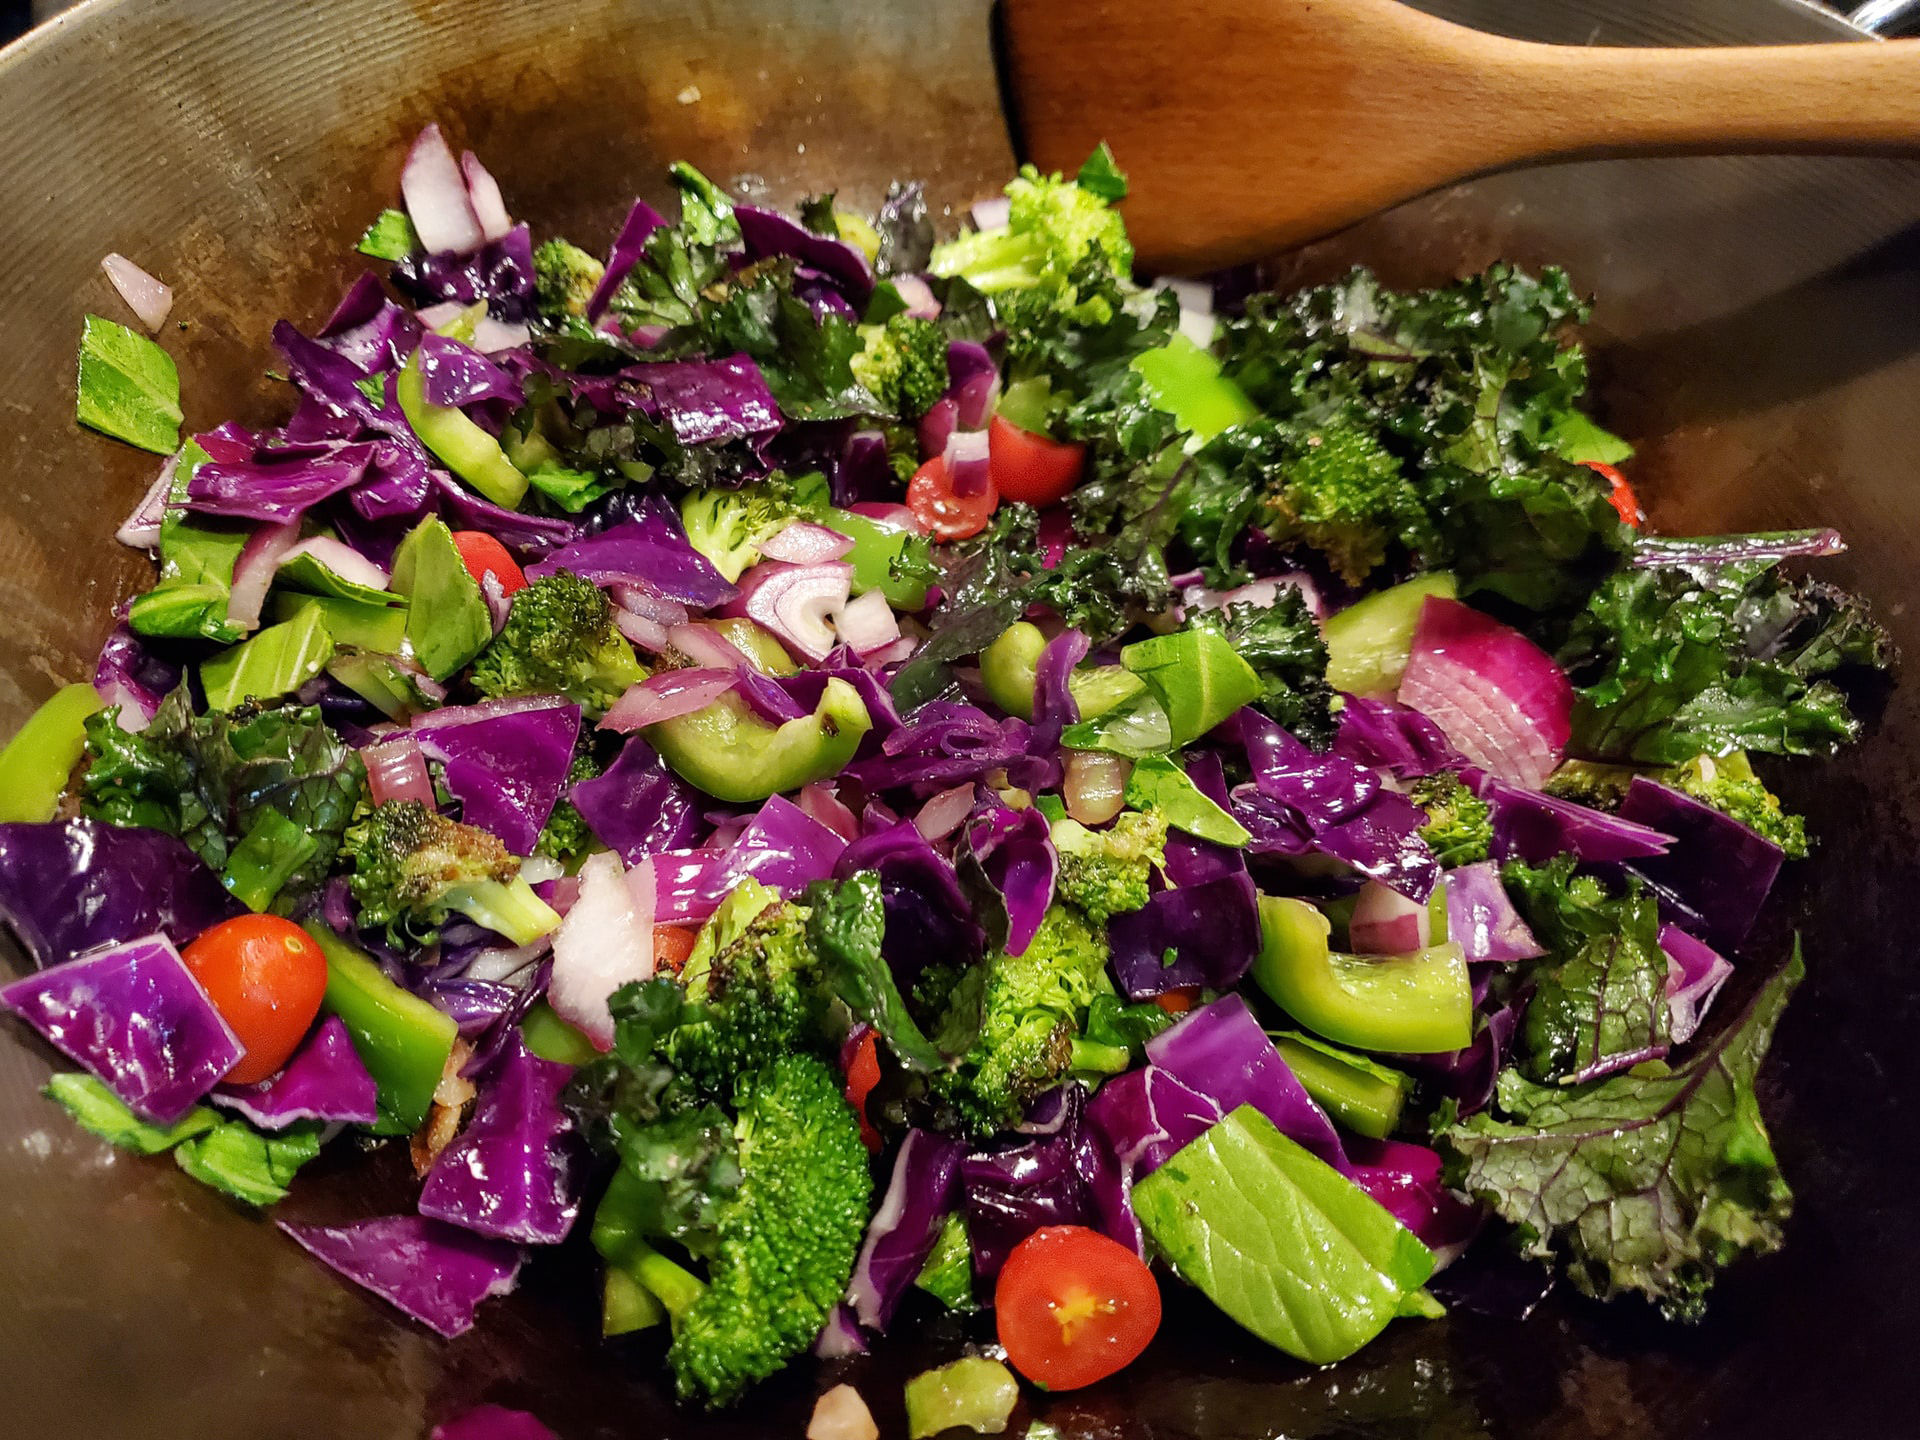 A broccoli salad with onions and tomatoes.